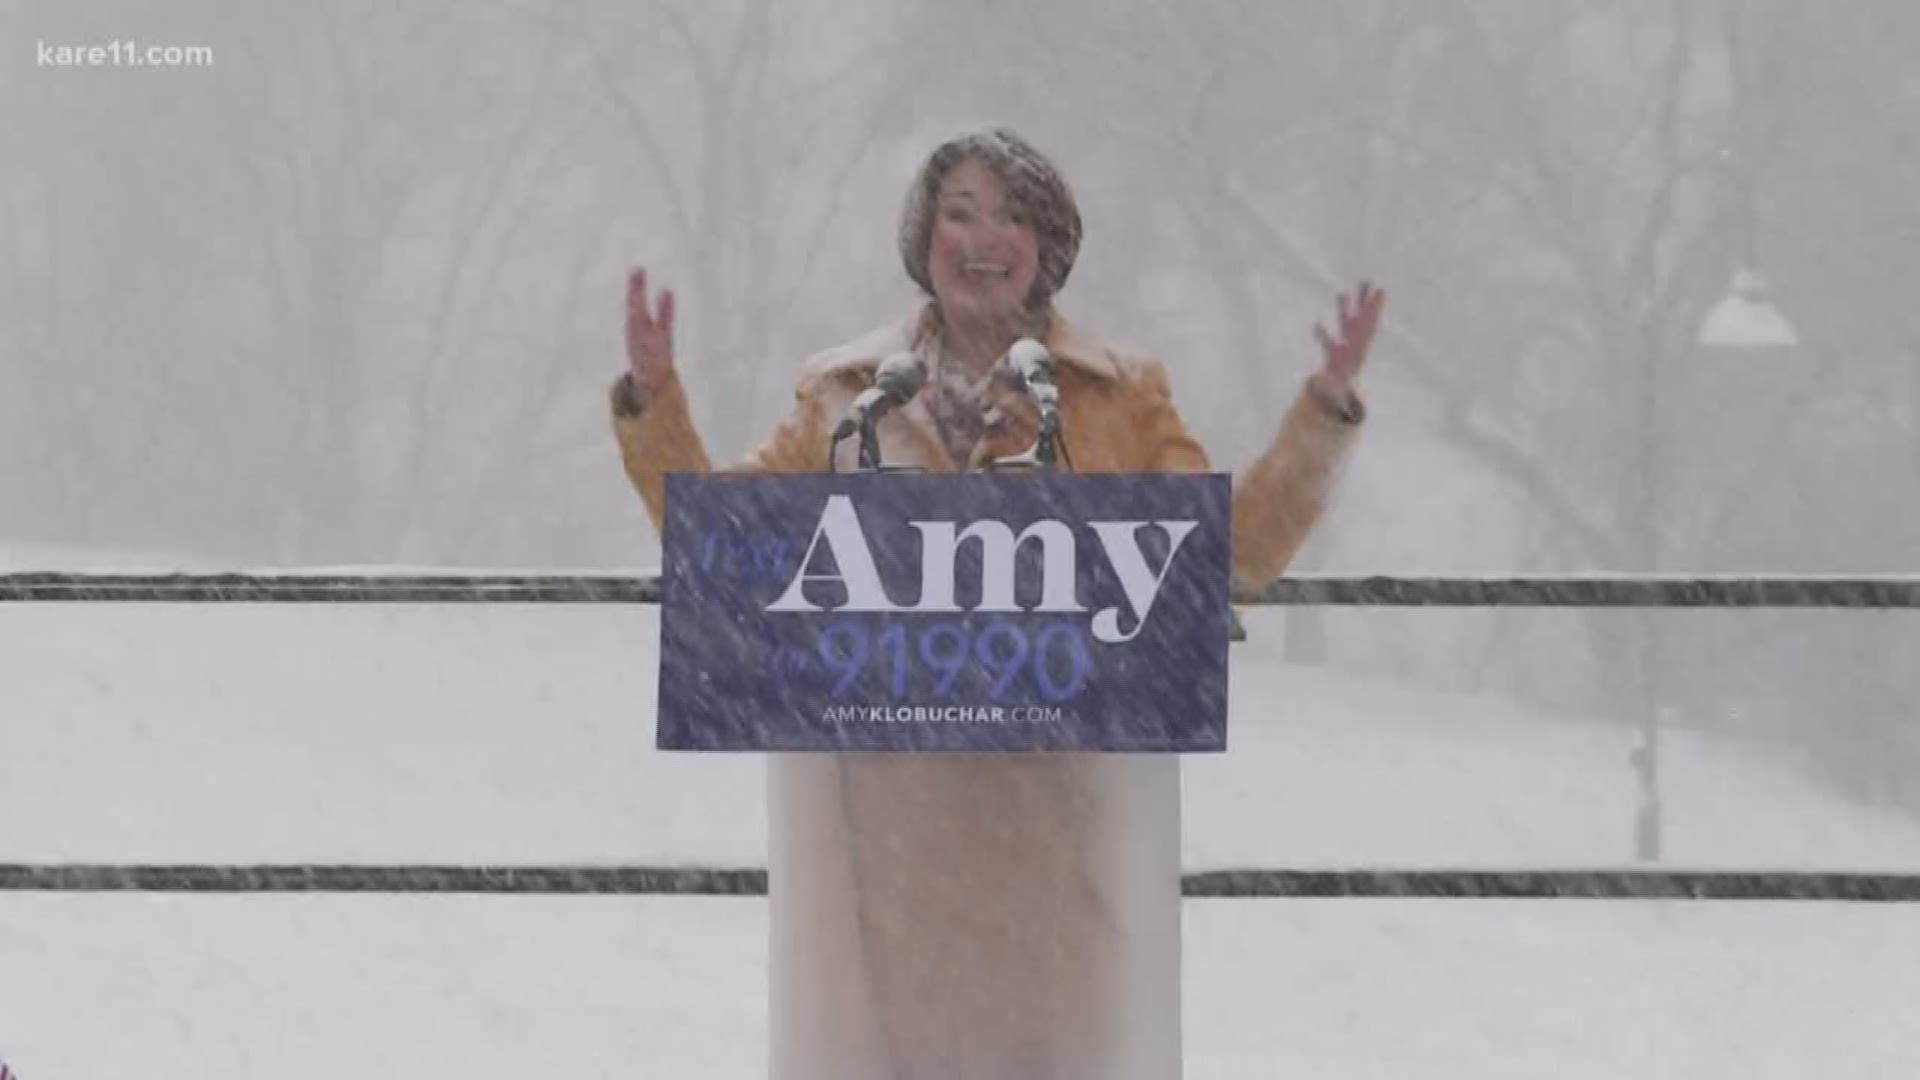 Fresh off her announcement she's joining the presidential race, Sen. Amy Klobuchar said her early campaigning will take her to early caucus state Iowa and neighboring Wisconsin.